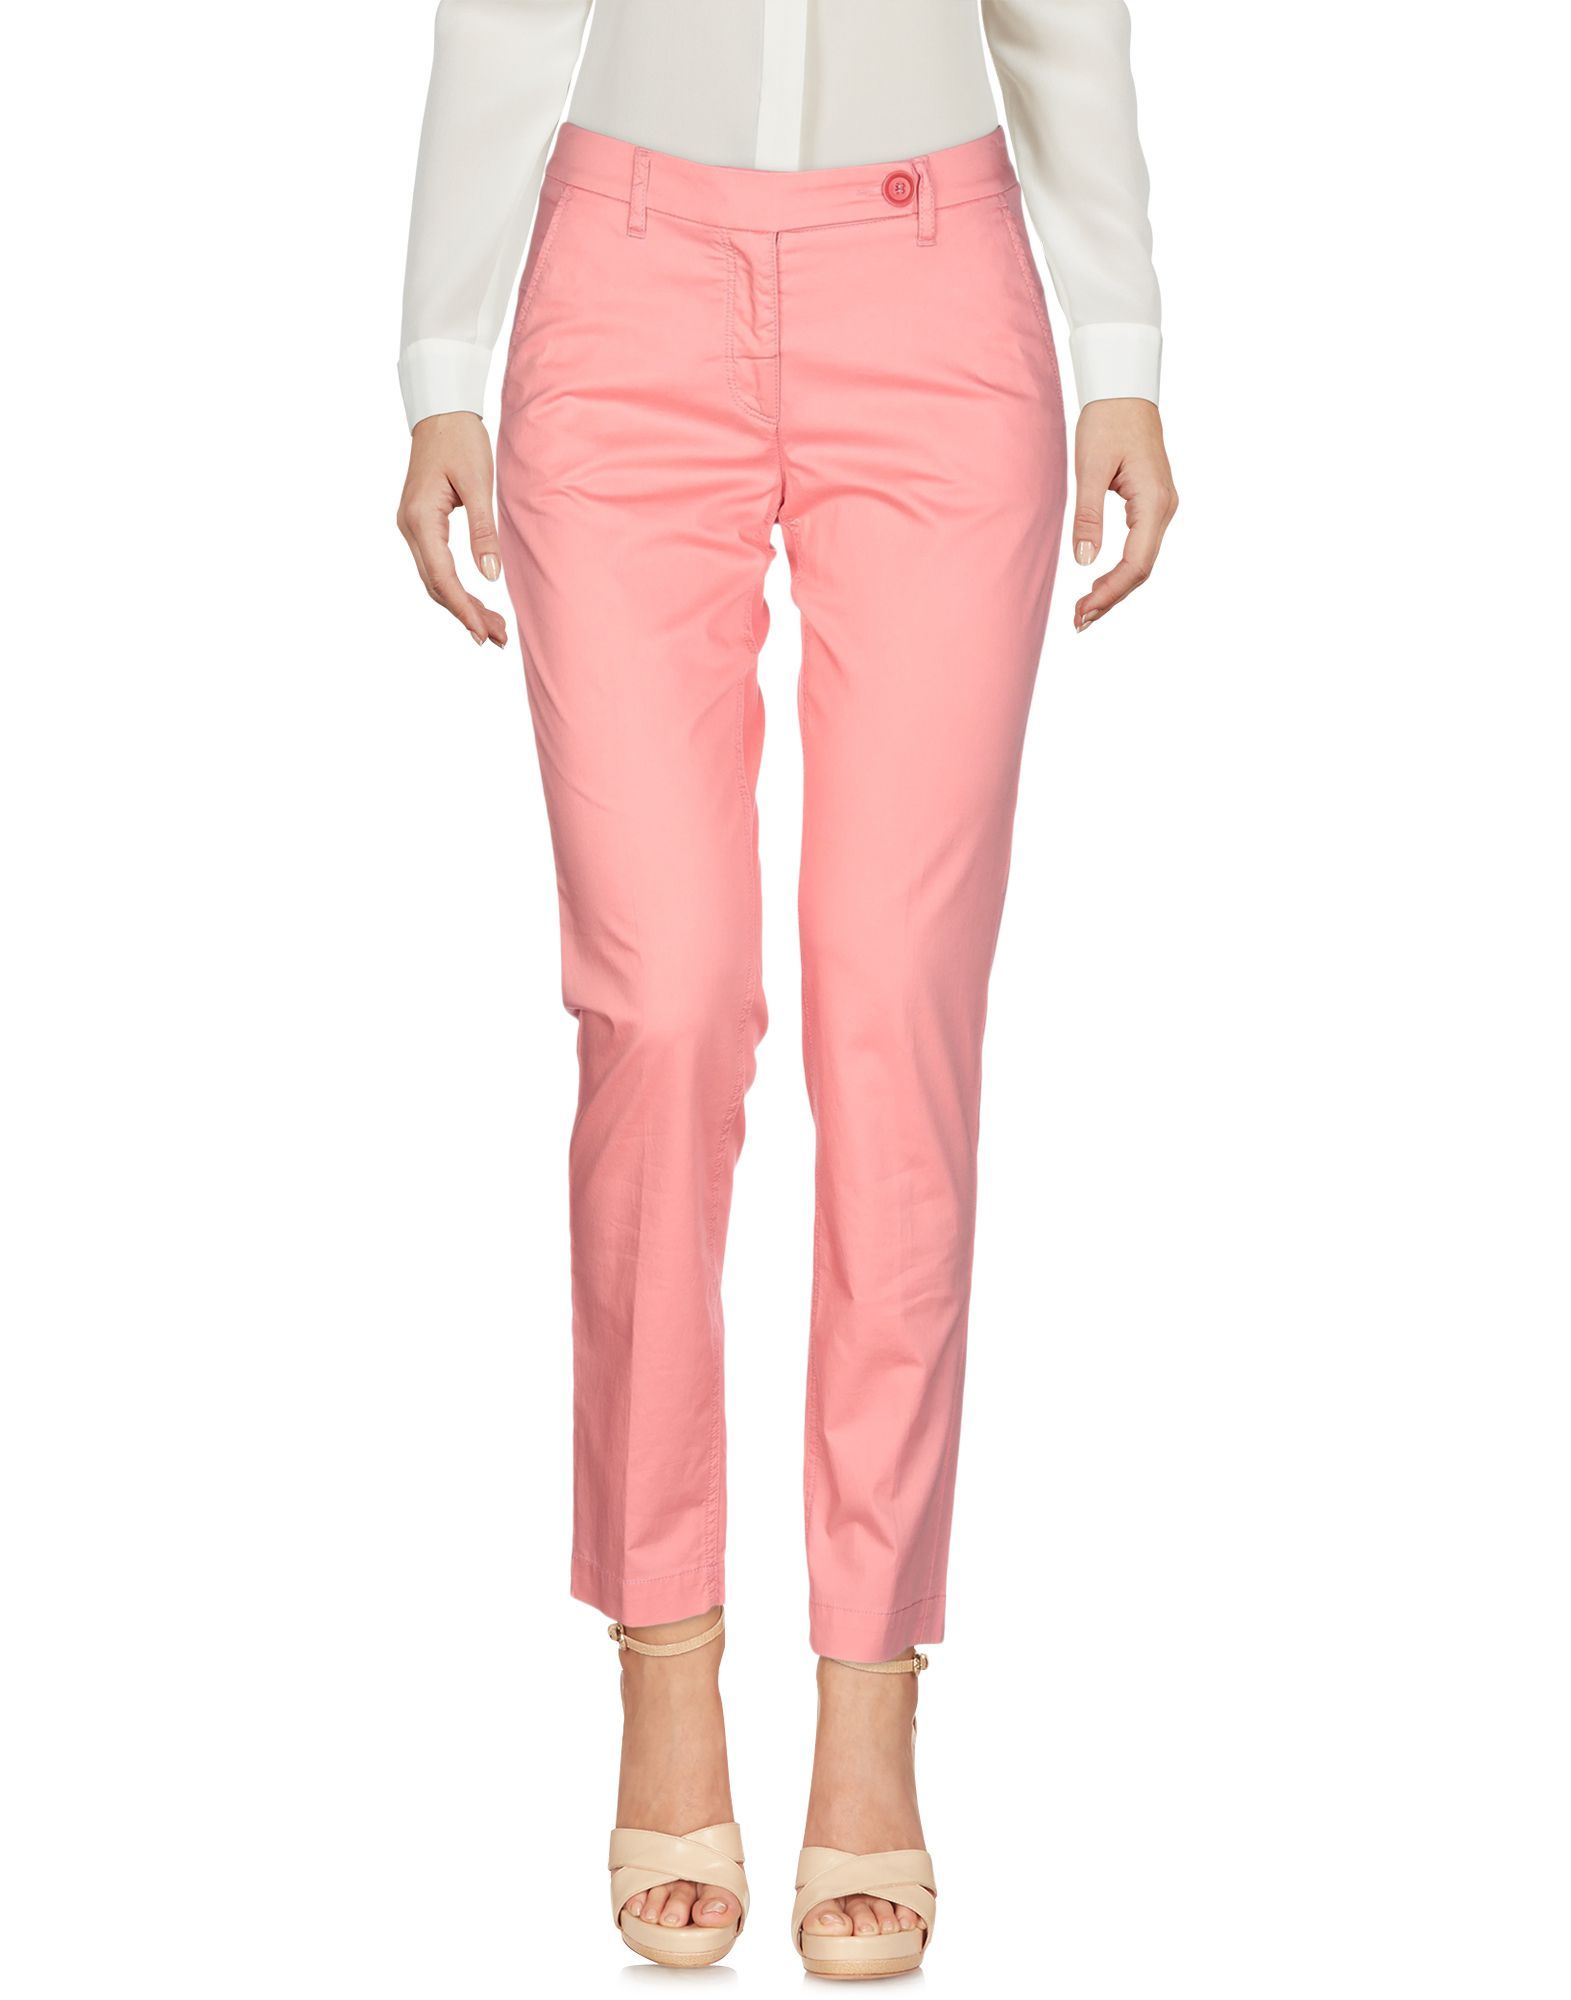 plain weave, no appliqués, basic solid colour, mid rise, regular fit, straight leg, button, zip, multipockets, stretch, chinos